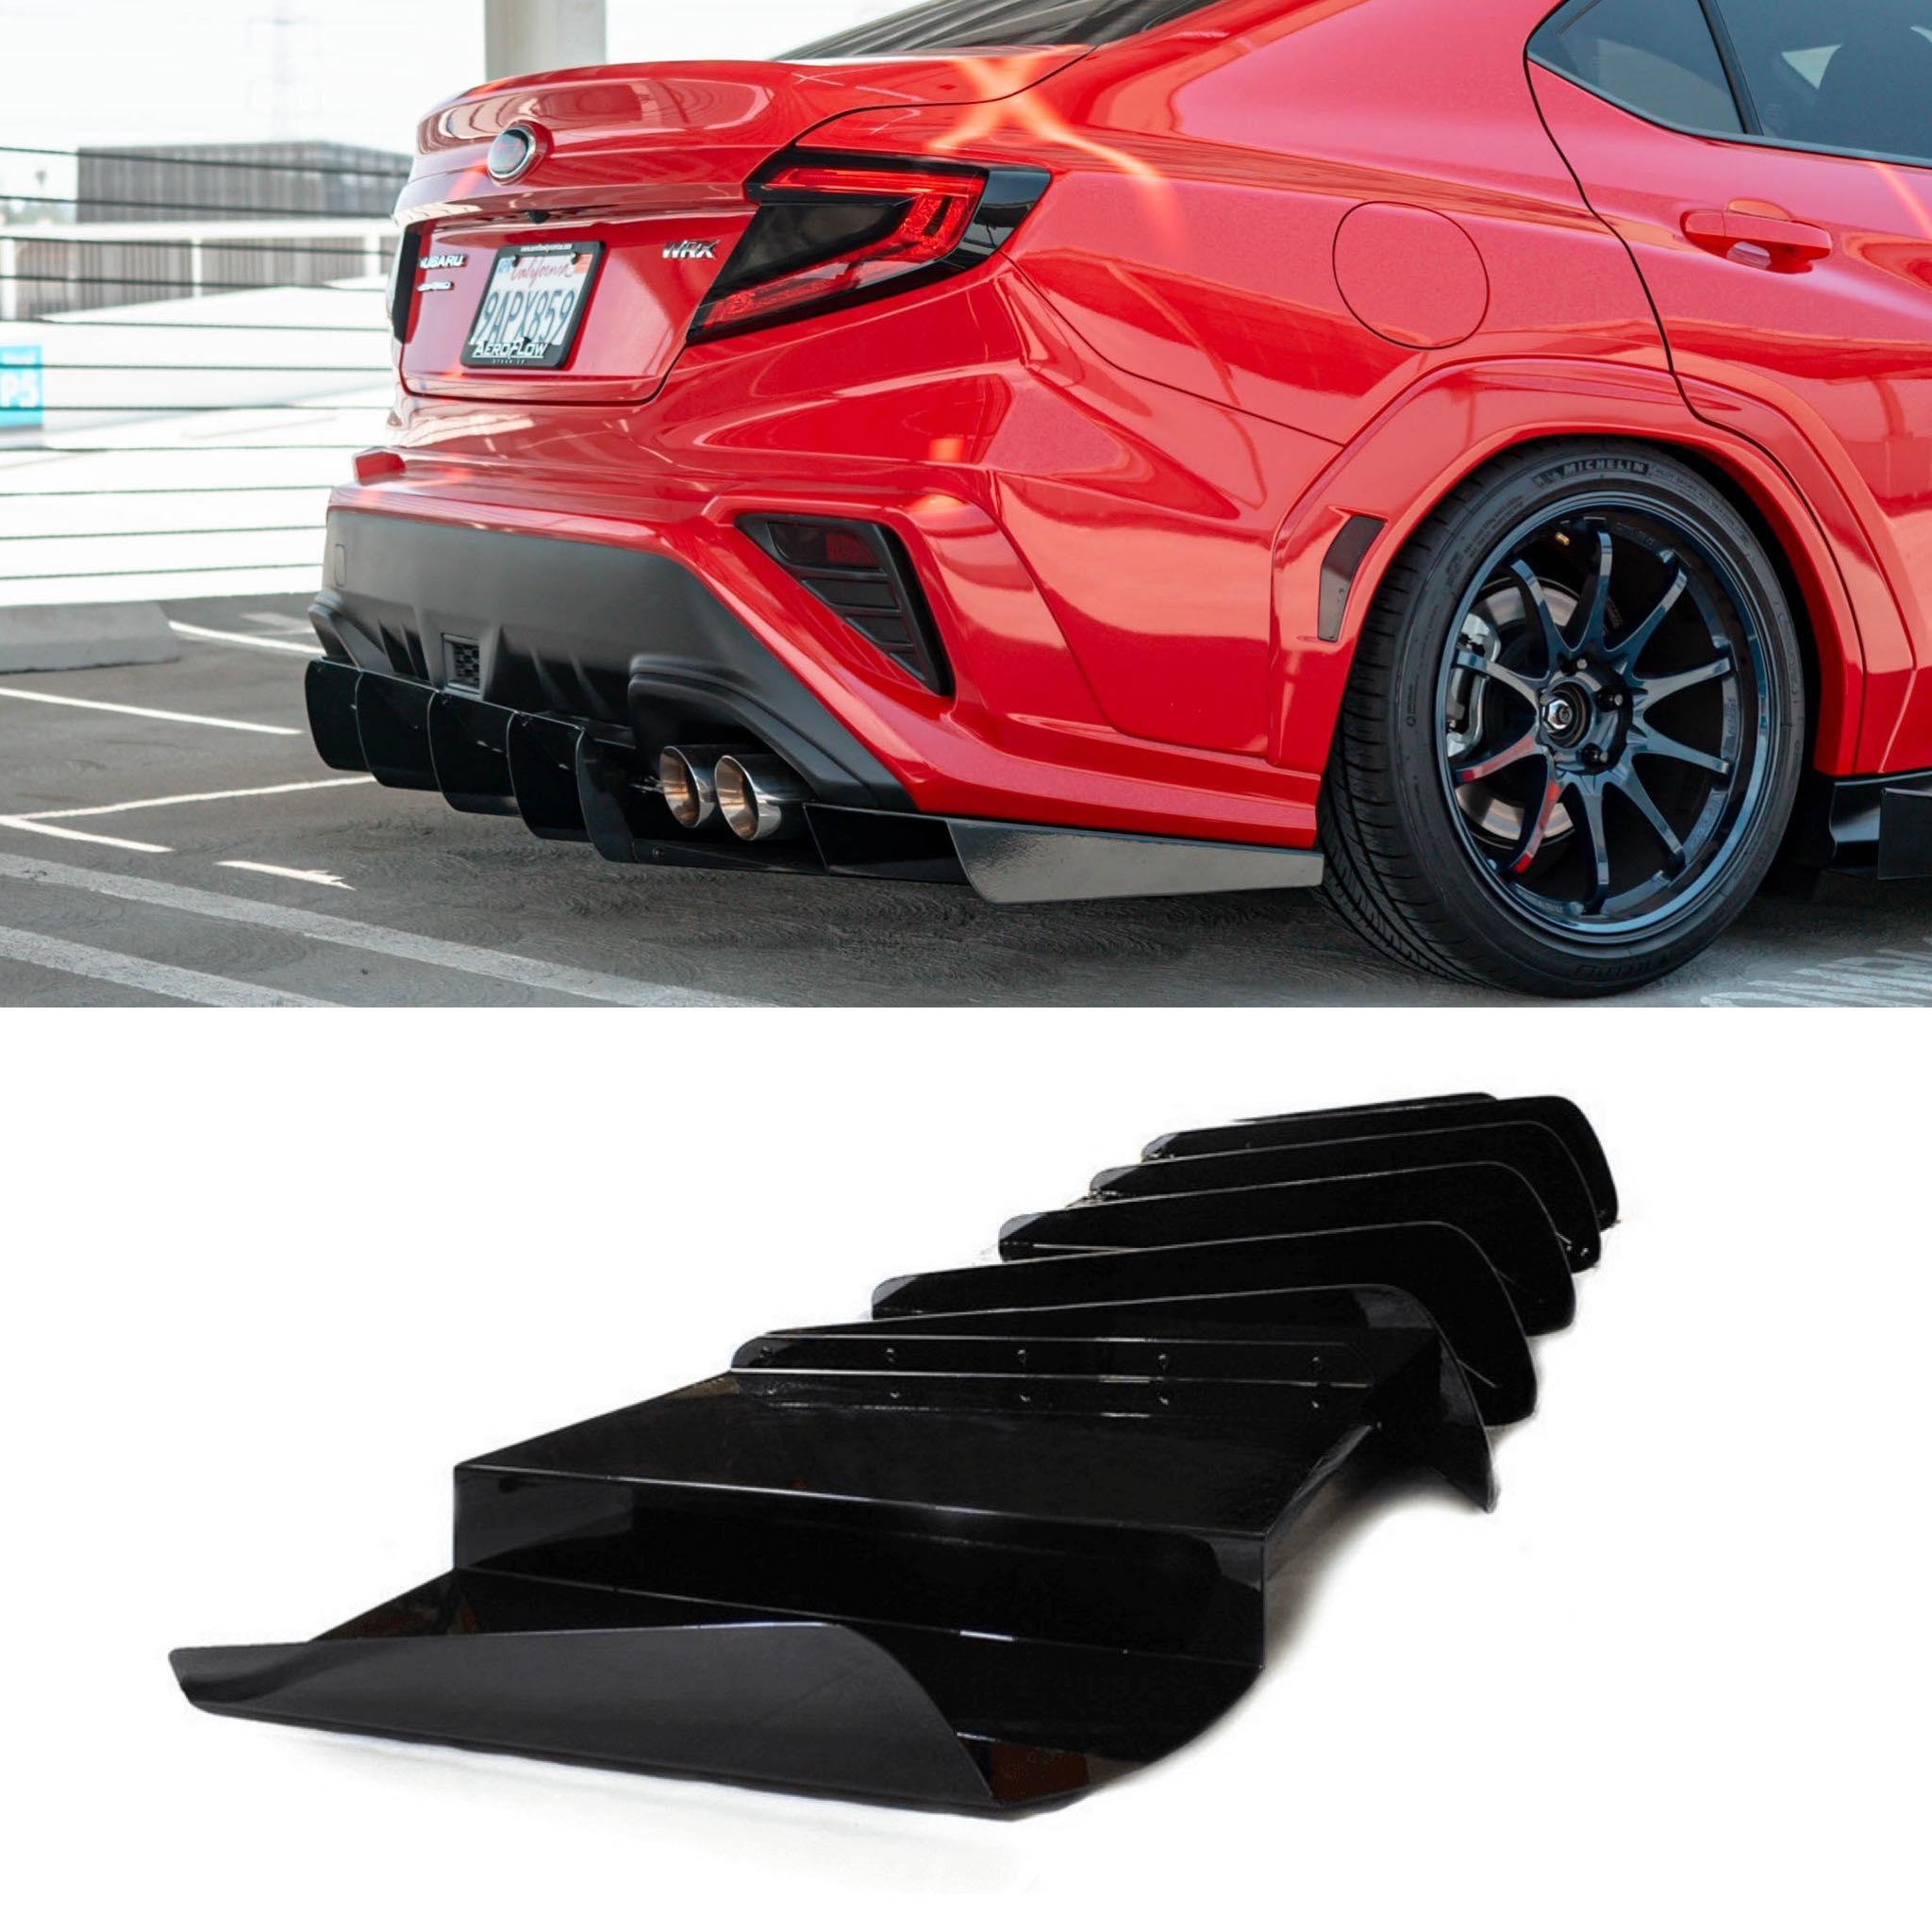 Racecar diffuser technology on road cars